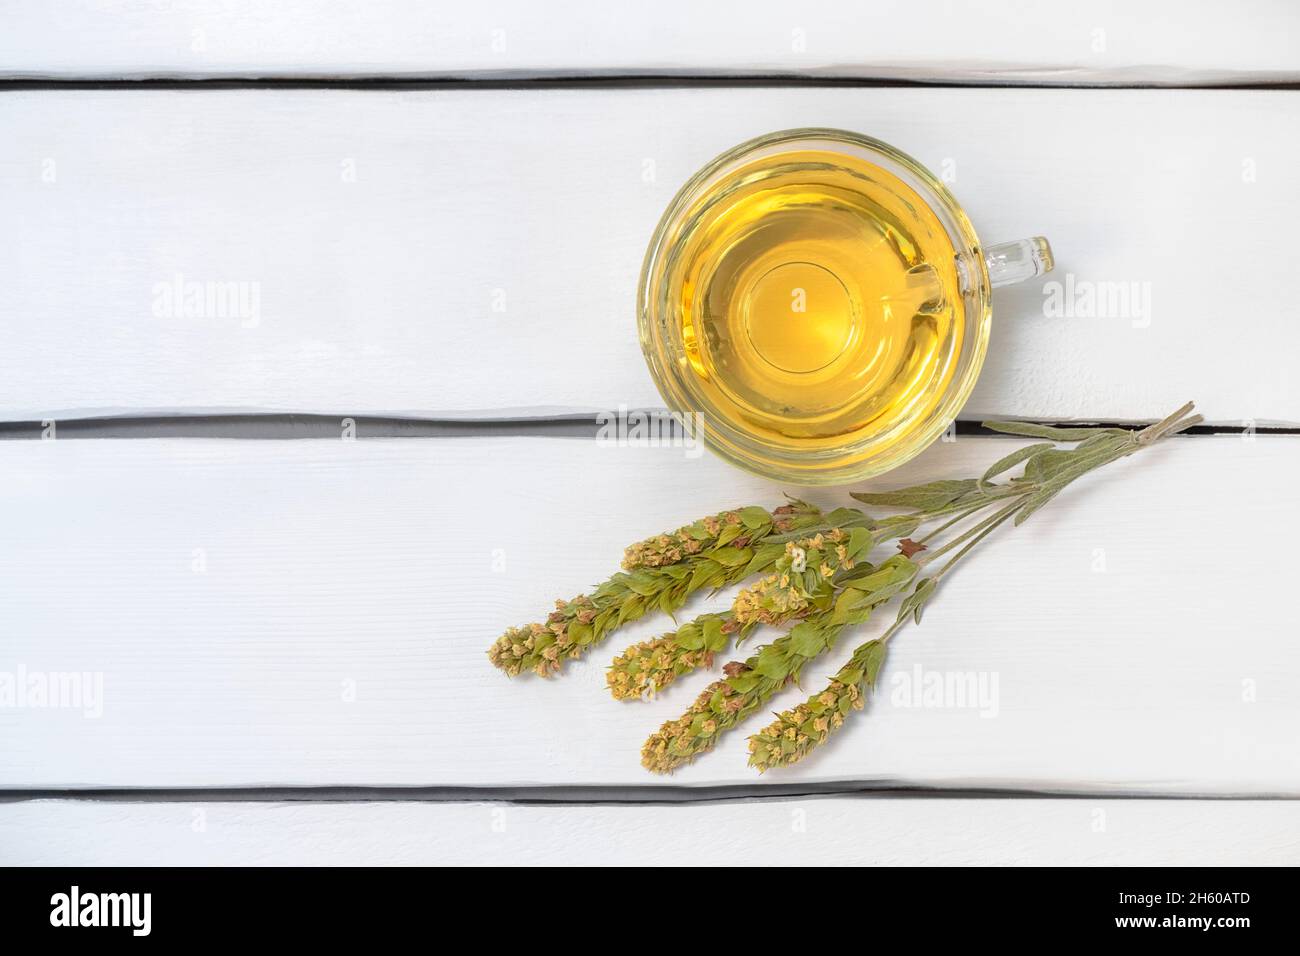 Top view of glass cup of herbal tea Mursalski Chai with dried leaves and flowers on white wooden table, copy space Stock Photo